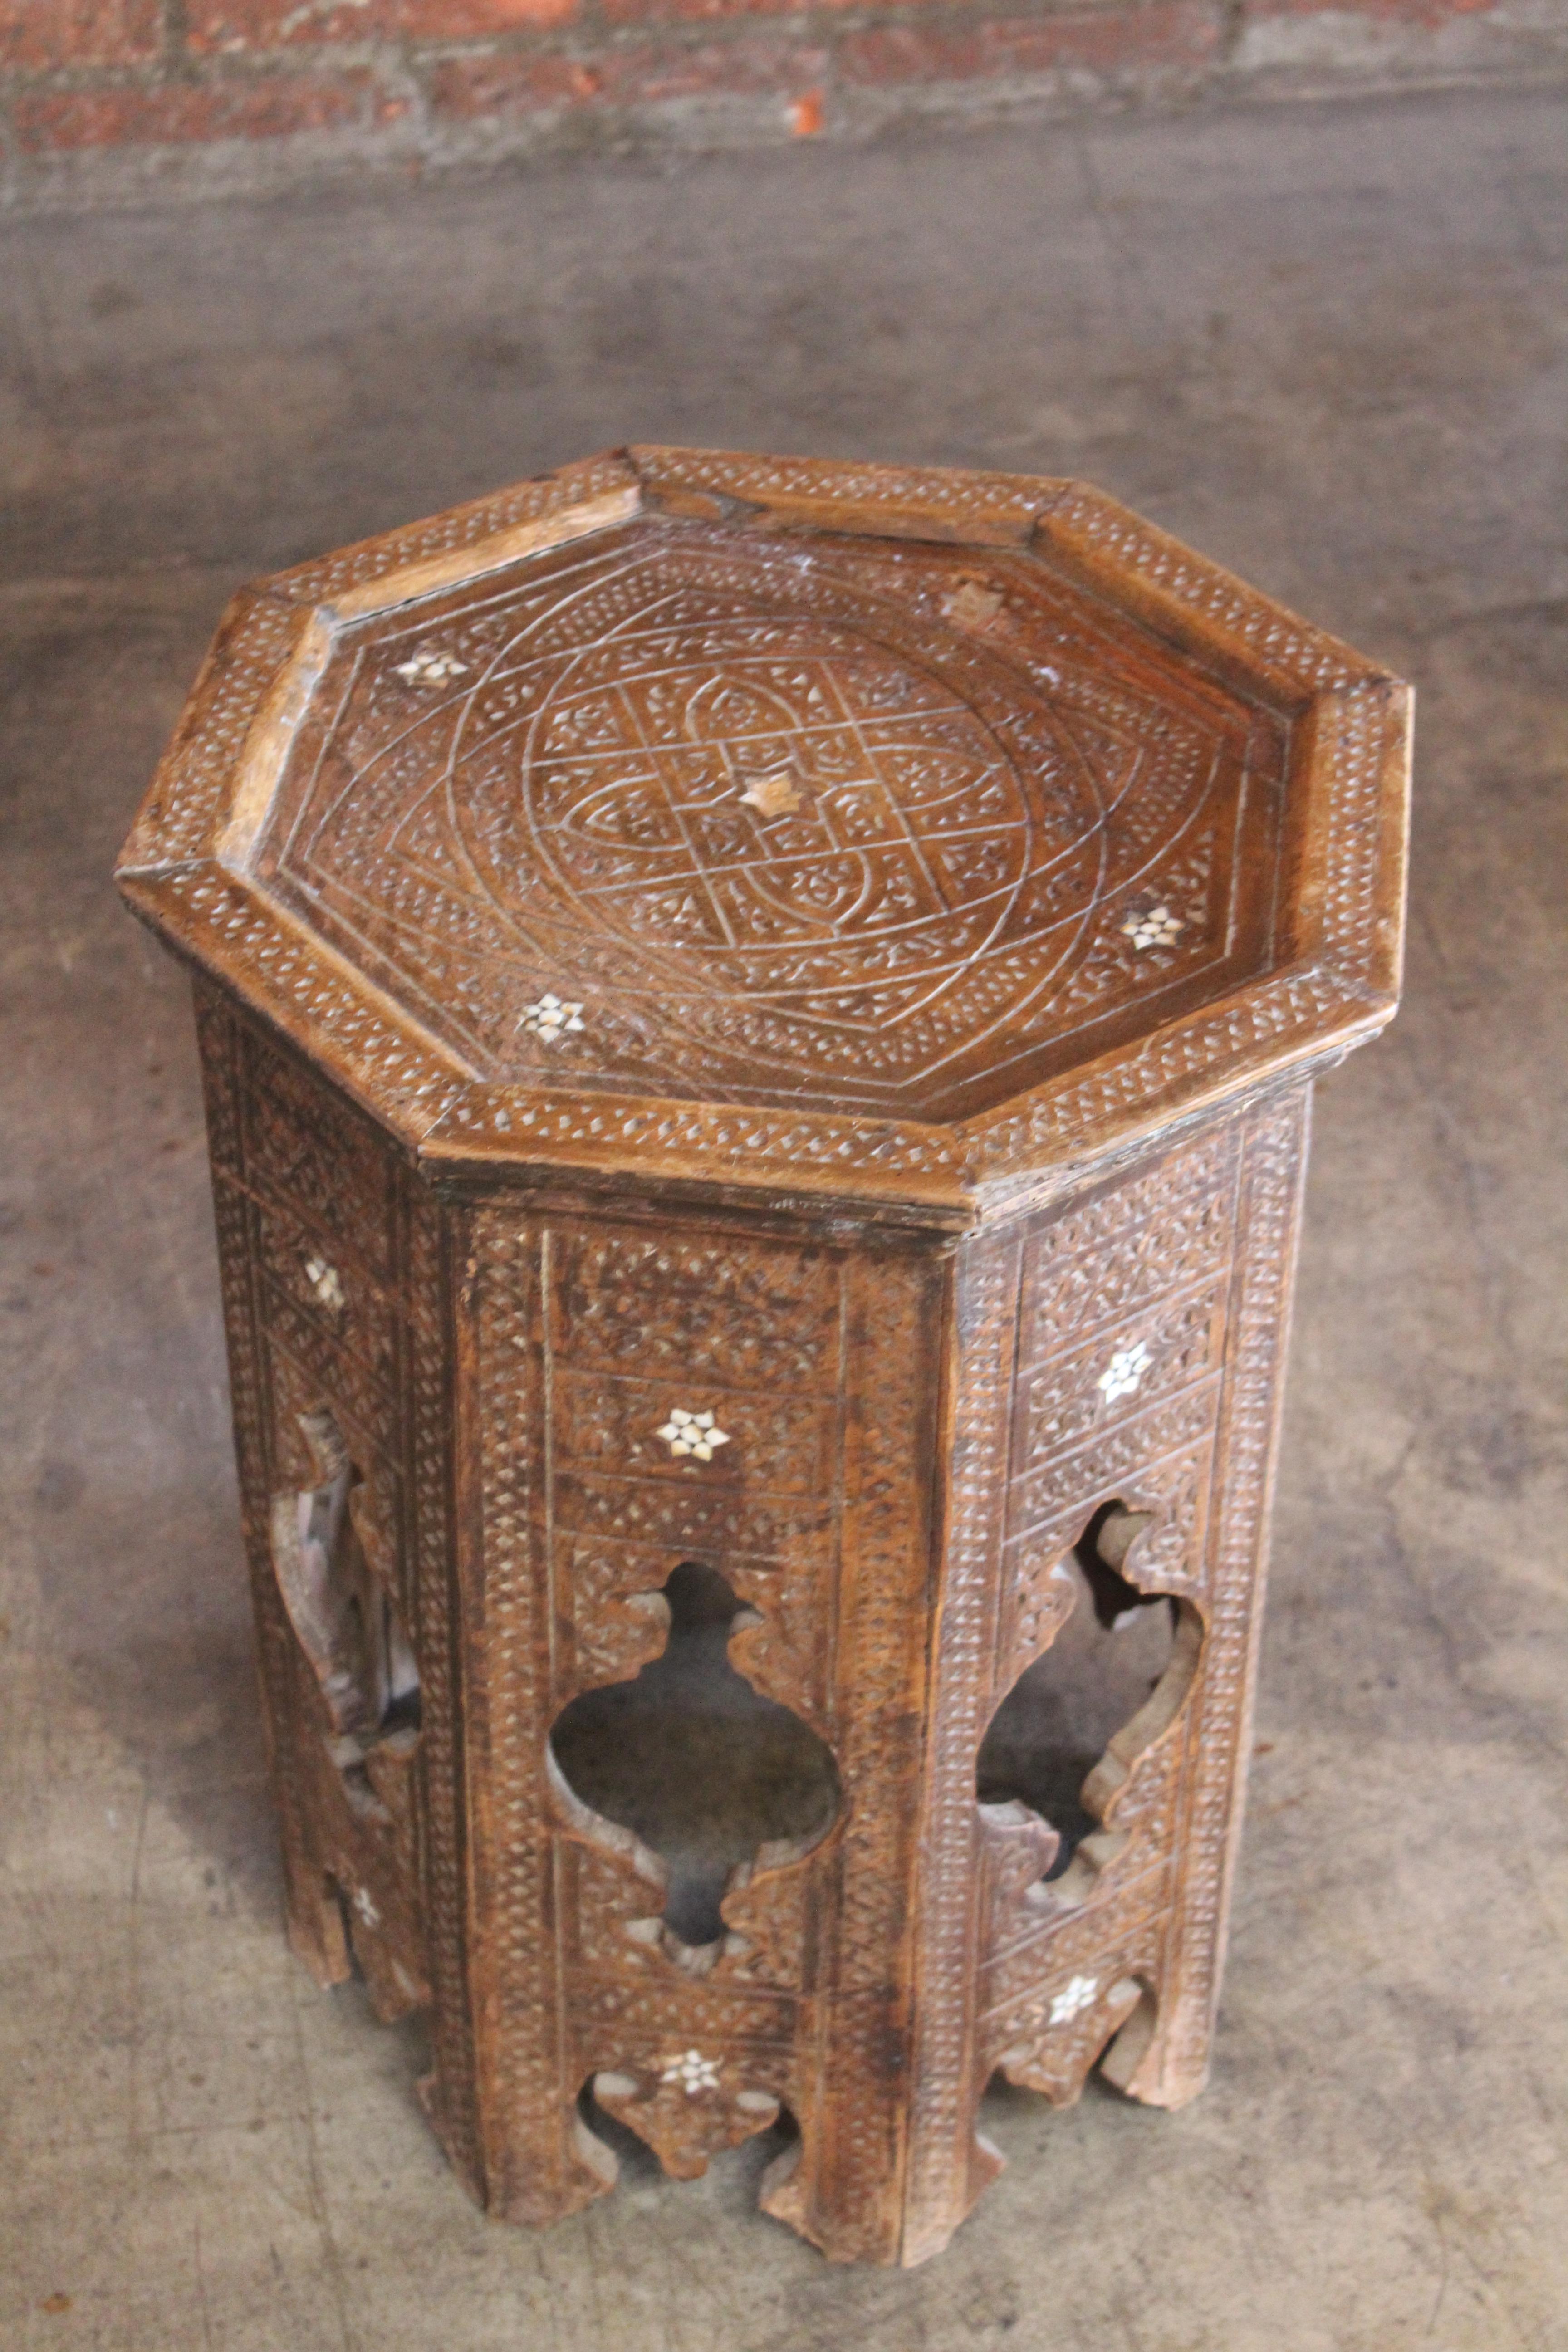 An antique Syrian side table with carved and inlaid details, late 19th century. In overall good condition with wear appropriate with age. Some inlay is missing and fading to the wood finish.